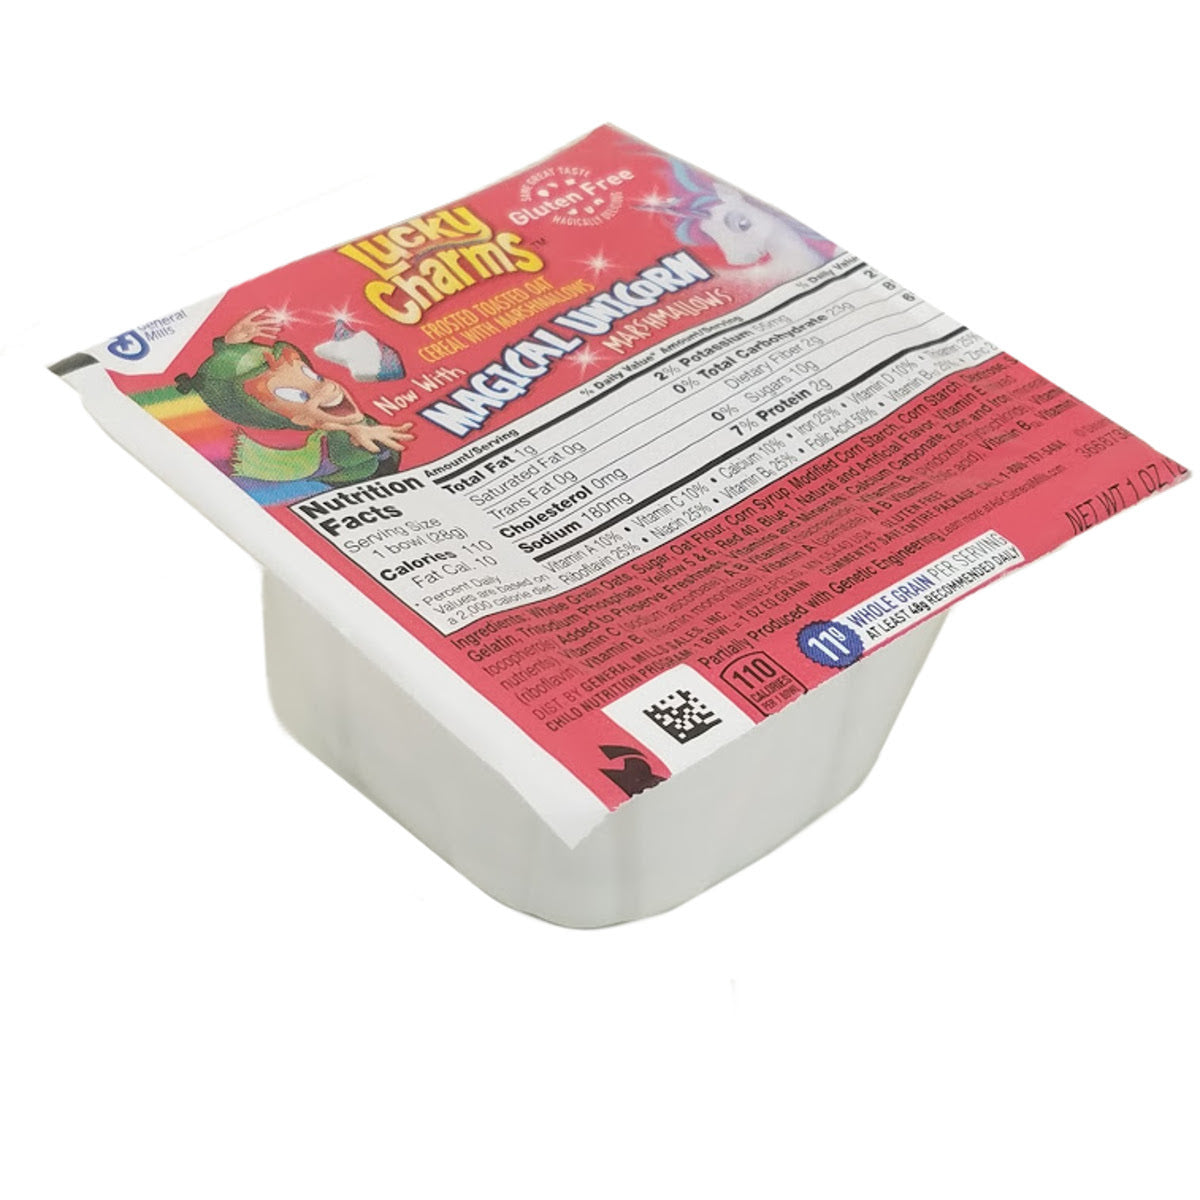 Lucky Charms ‘On The Go’ Cereal Pot 28g